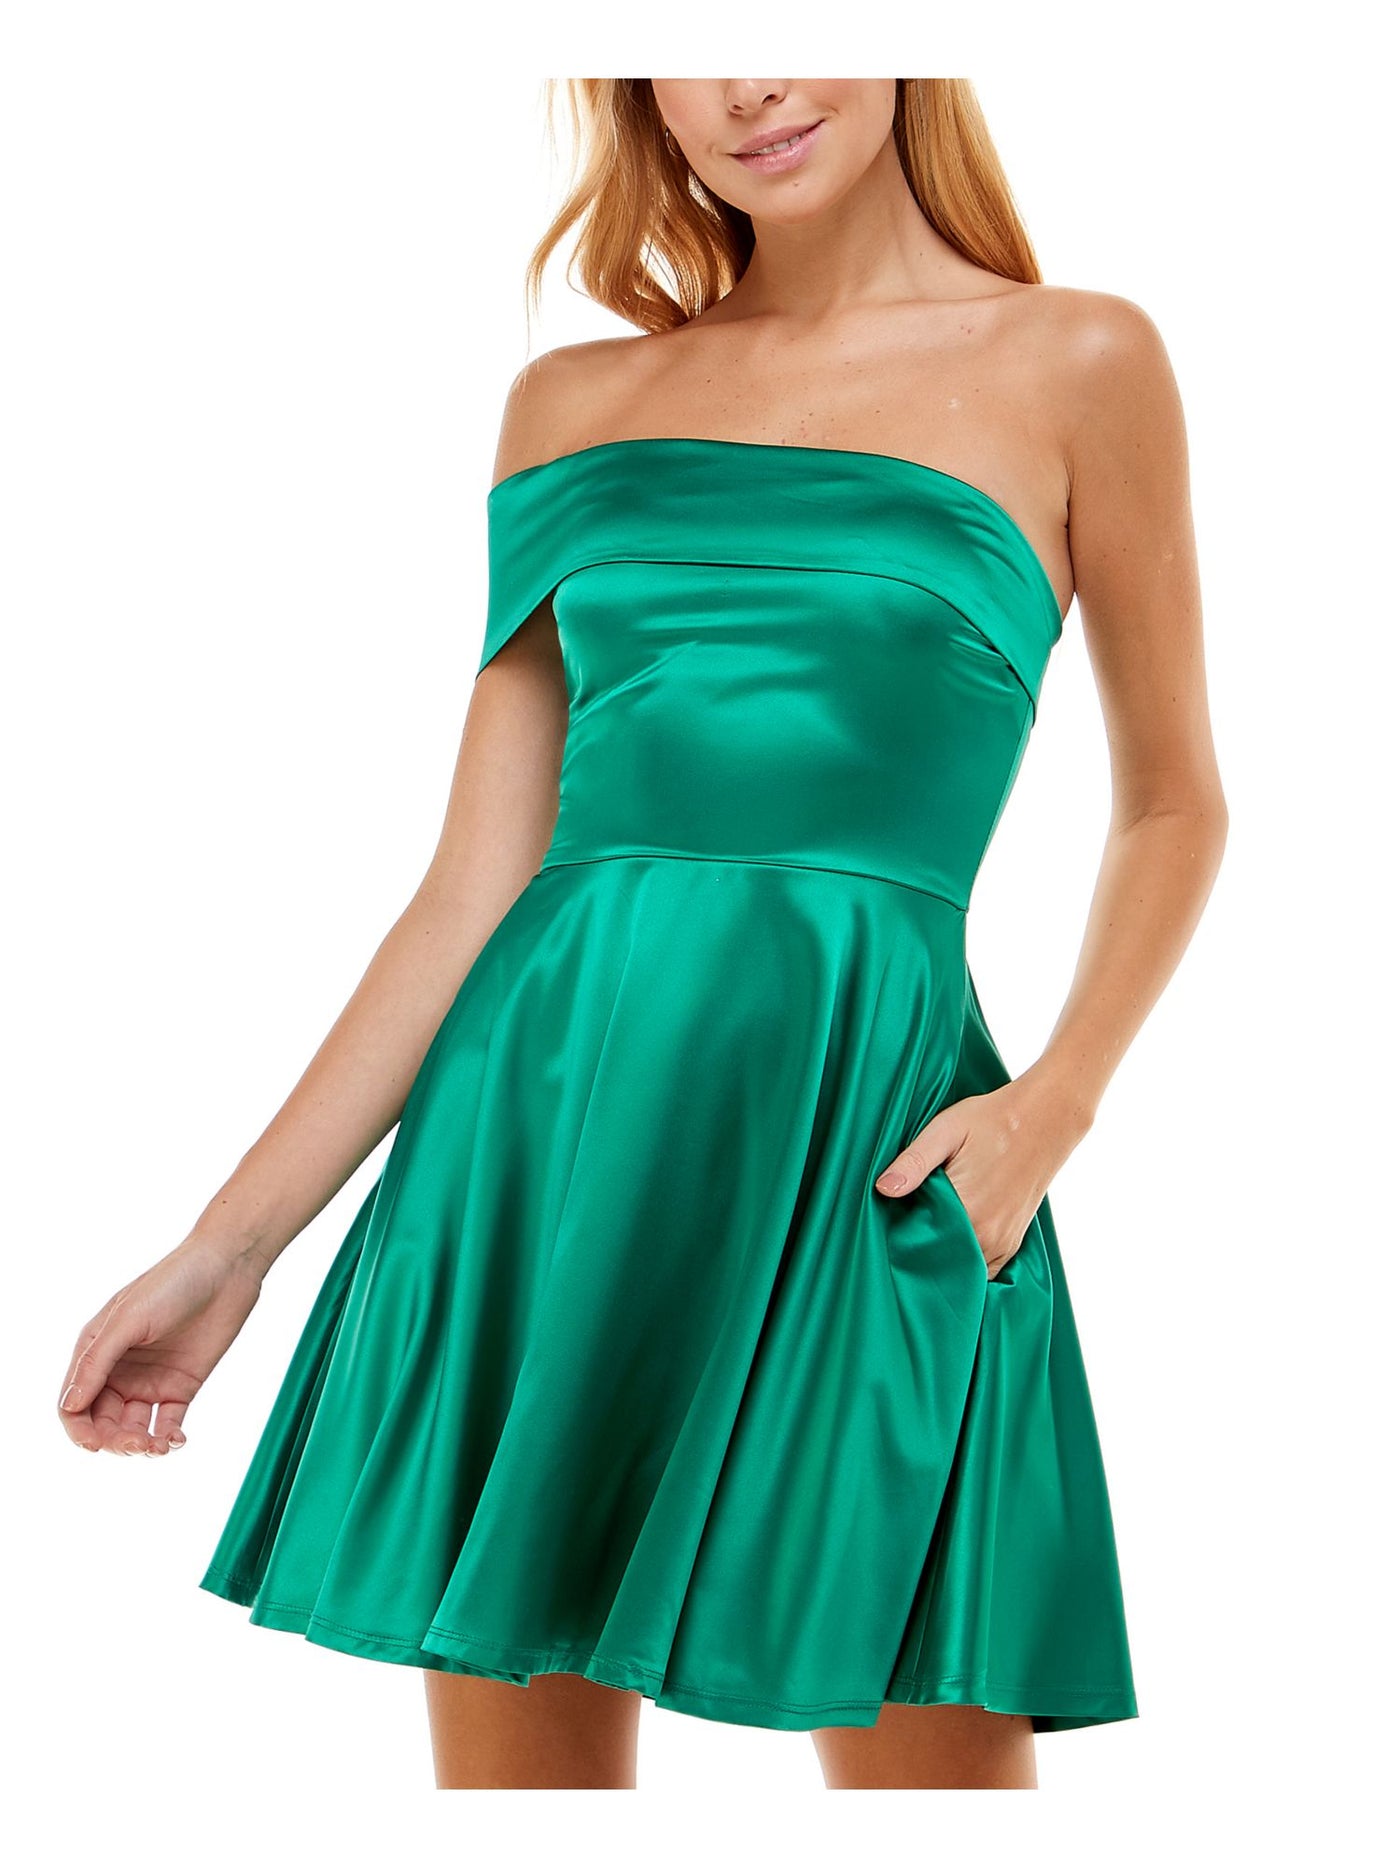 CITY STUDIO Womens Green Stretch Zippered Darted One Shoulder Sleeveless Off Shoulder Short Party Fit + Flare Dress Juniors 7